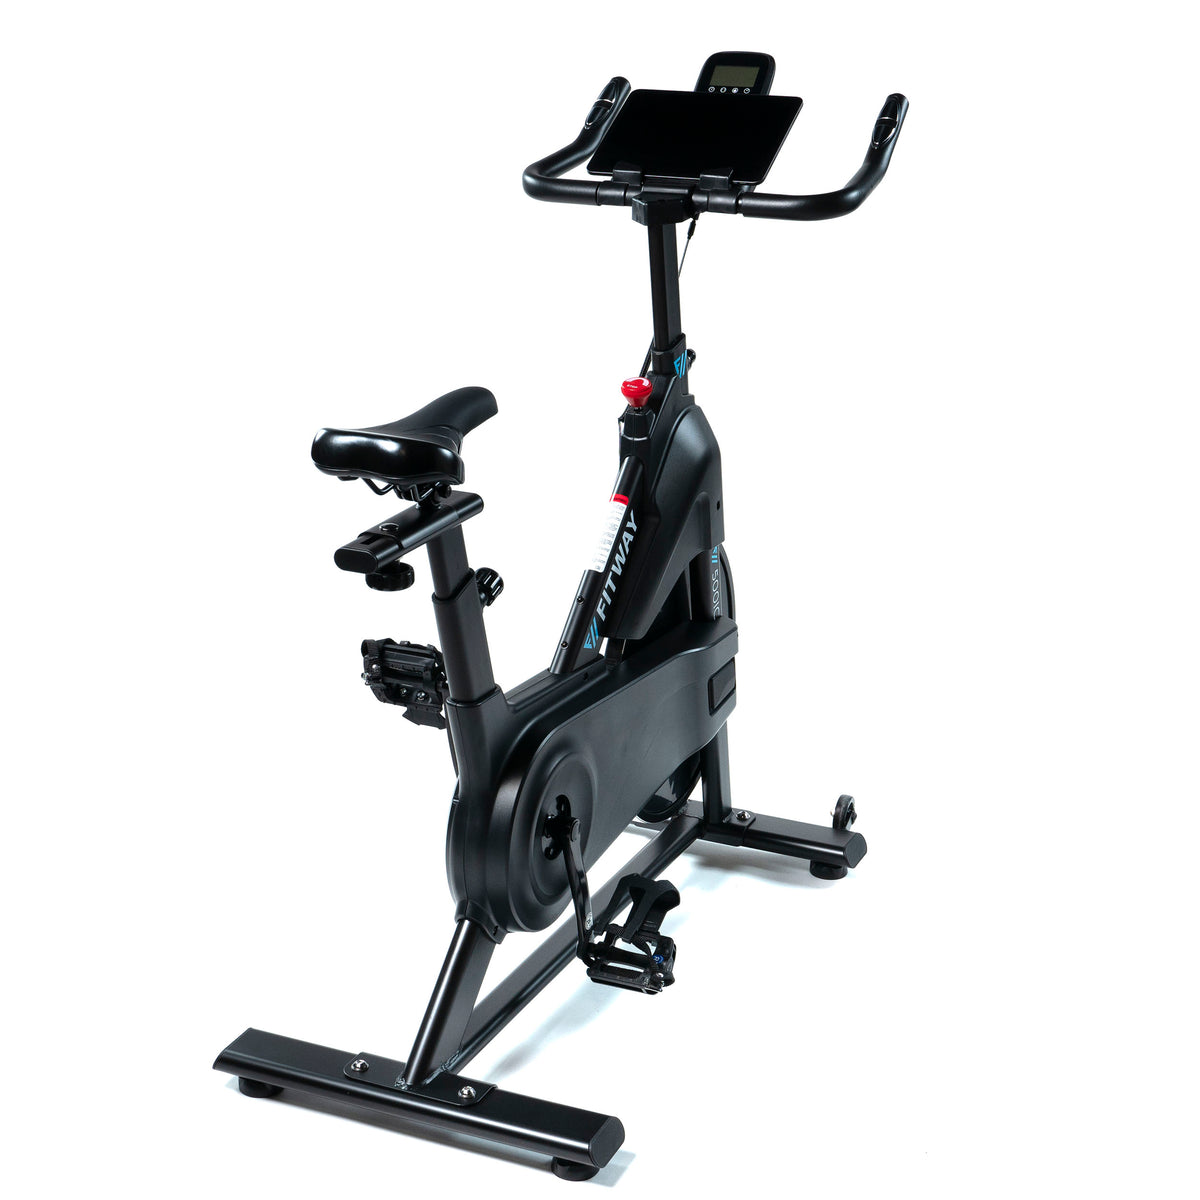 FitWay Equip. 500IC Indoor Cycle rear view